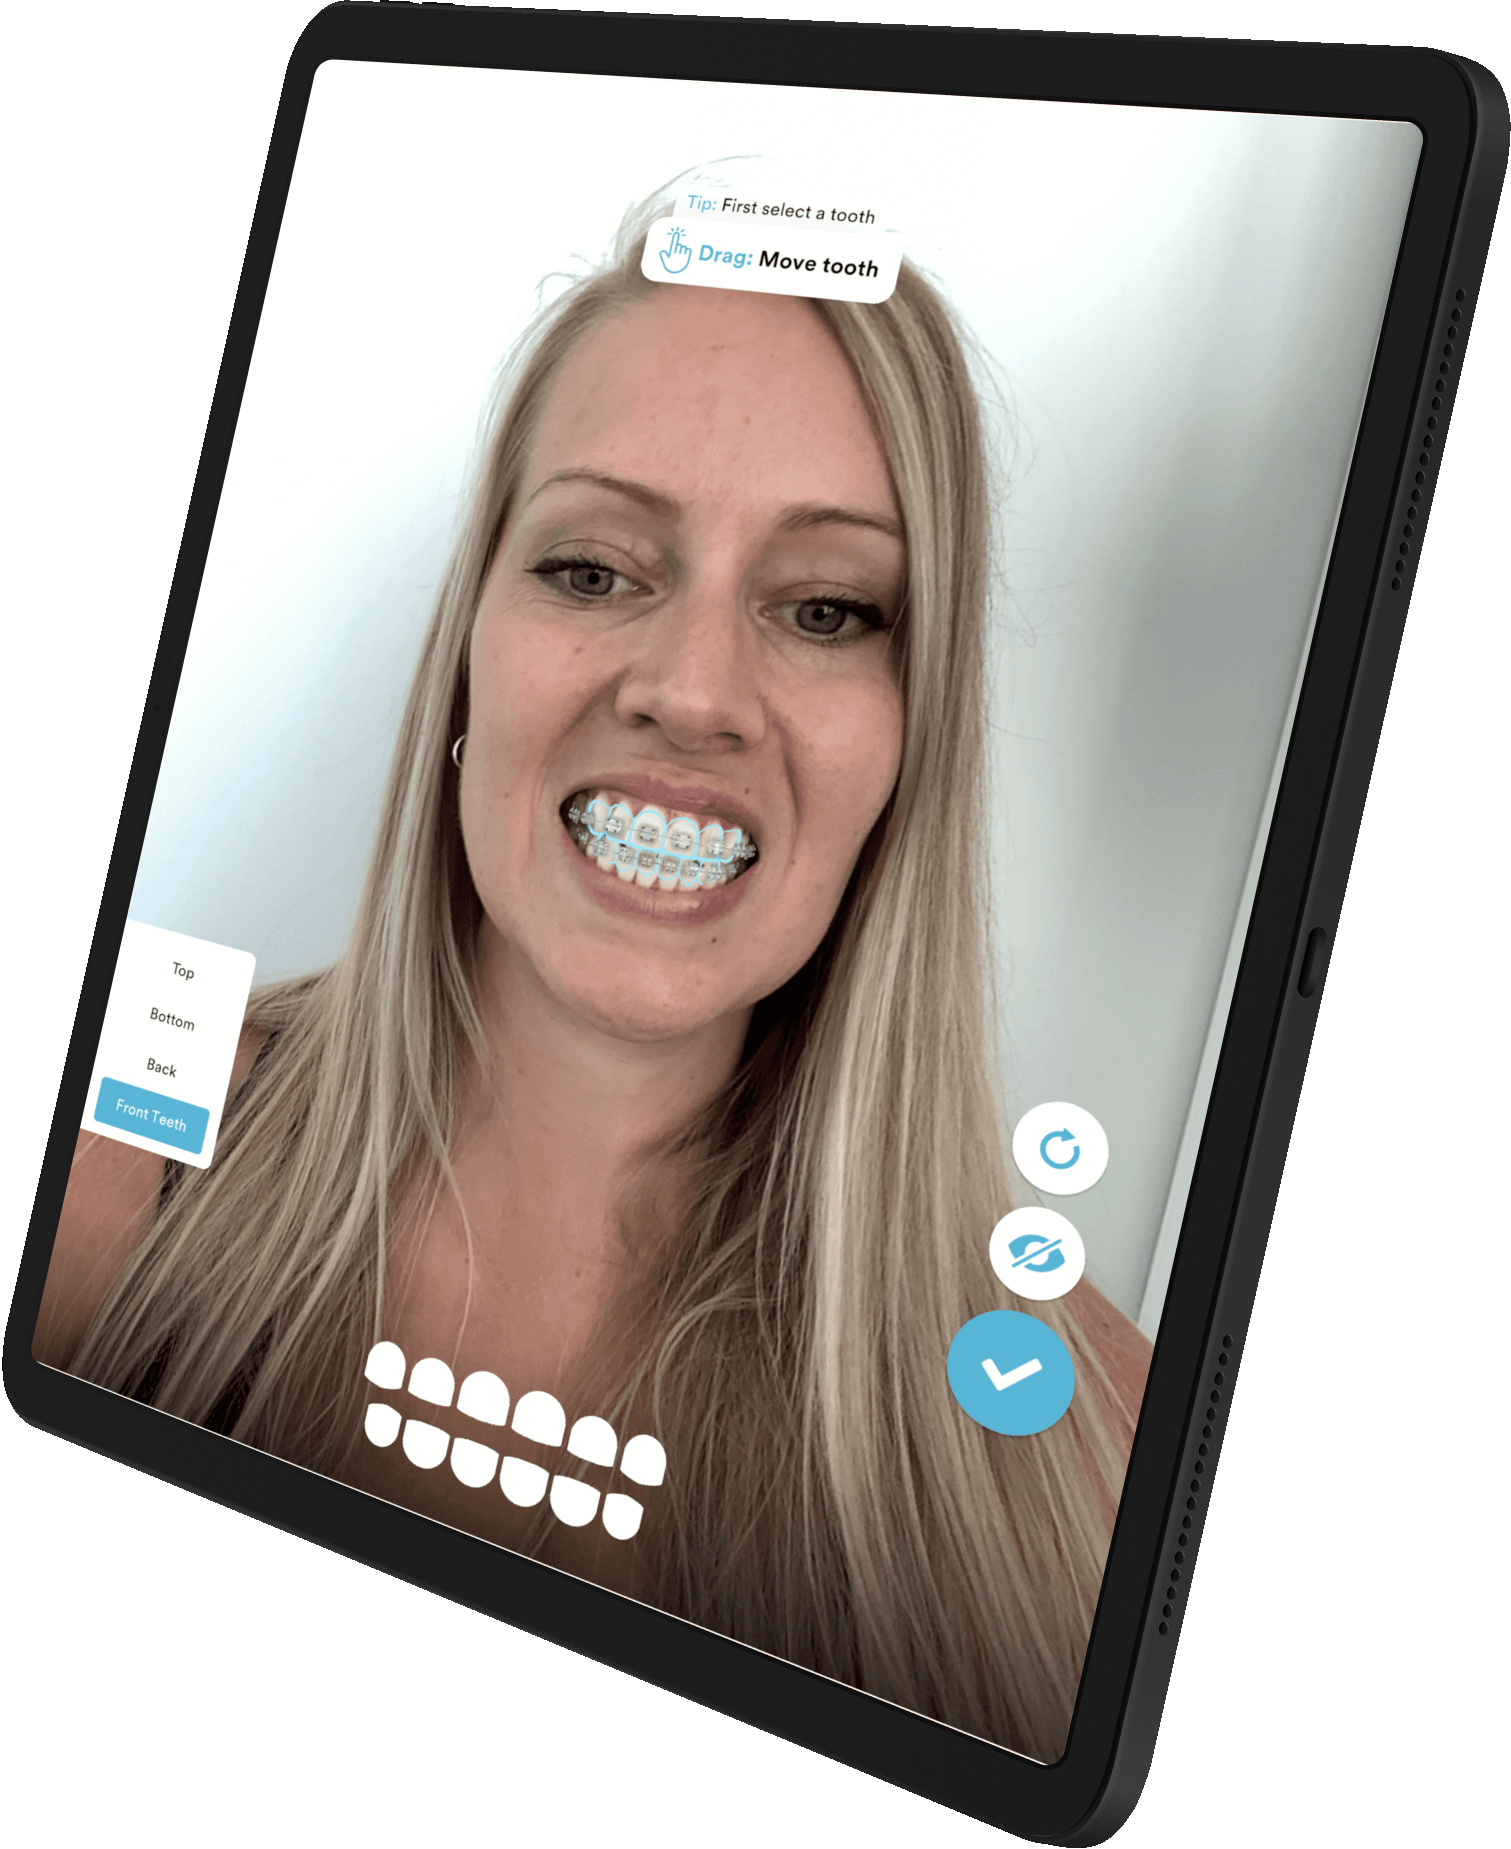 iPad showing a woman using AR to see how braces look on her teeth